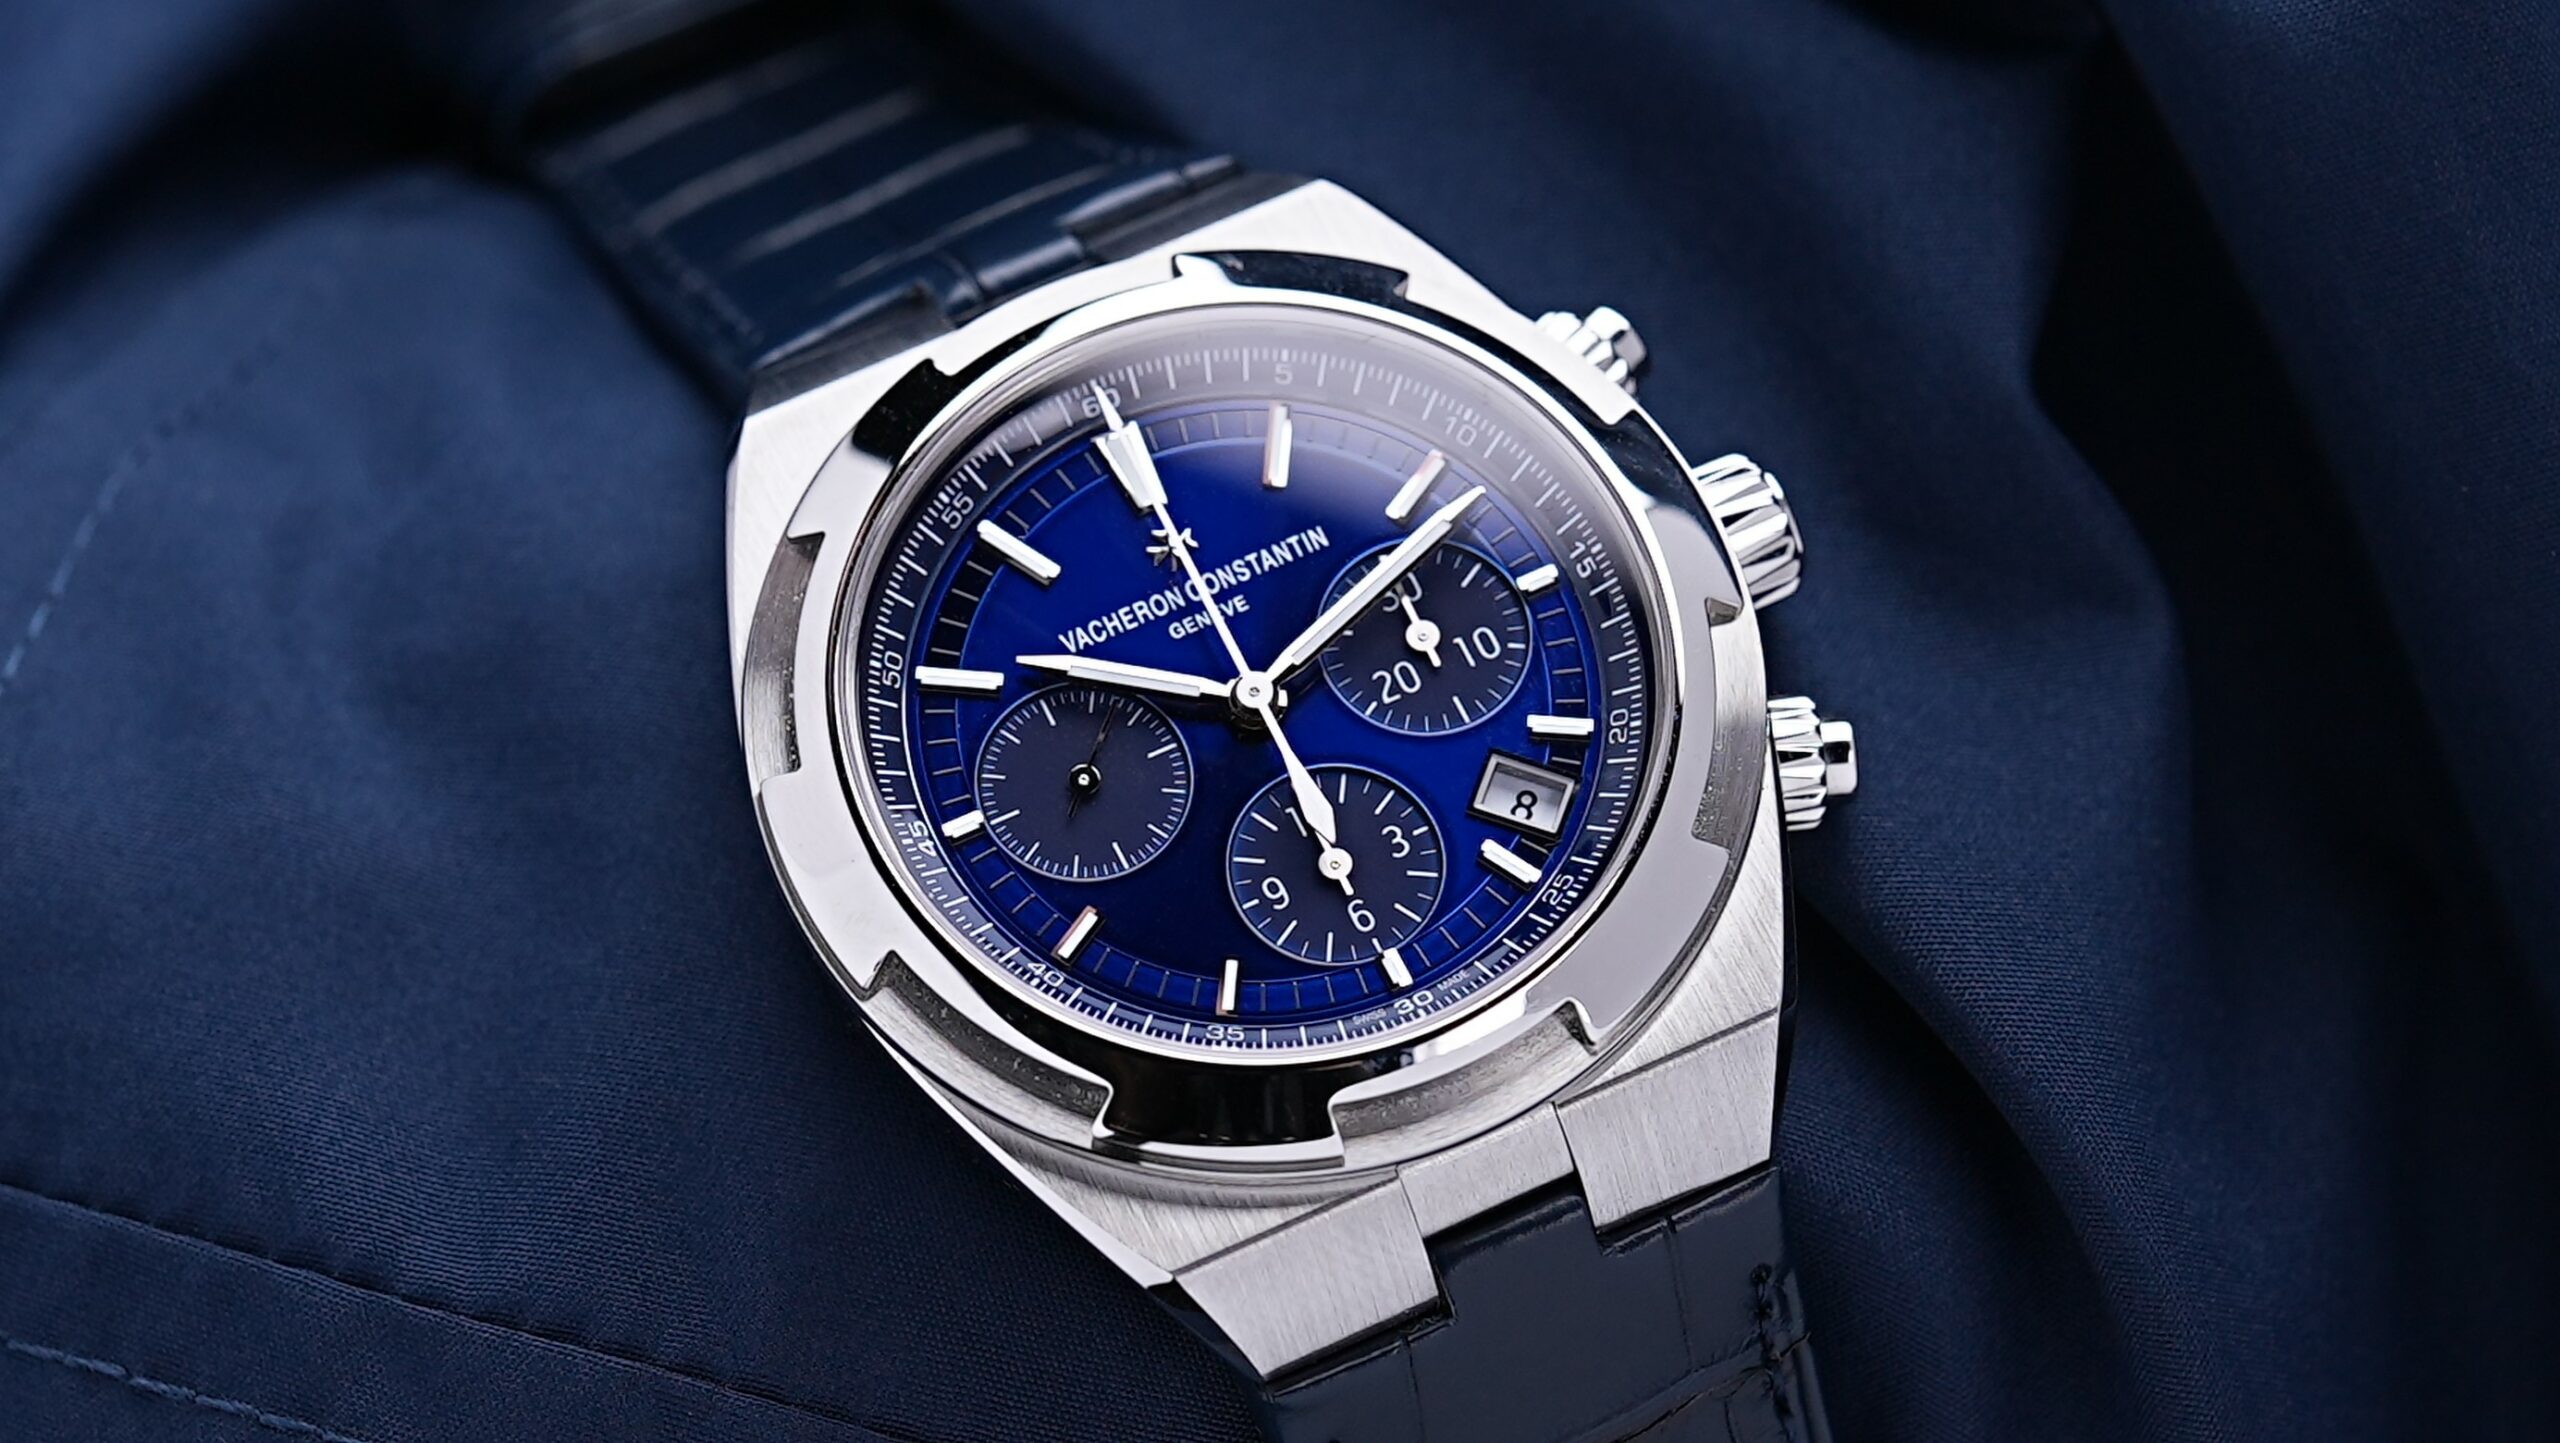 Review: The New Vacheron Constantin Overseas Chronograph with